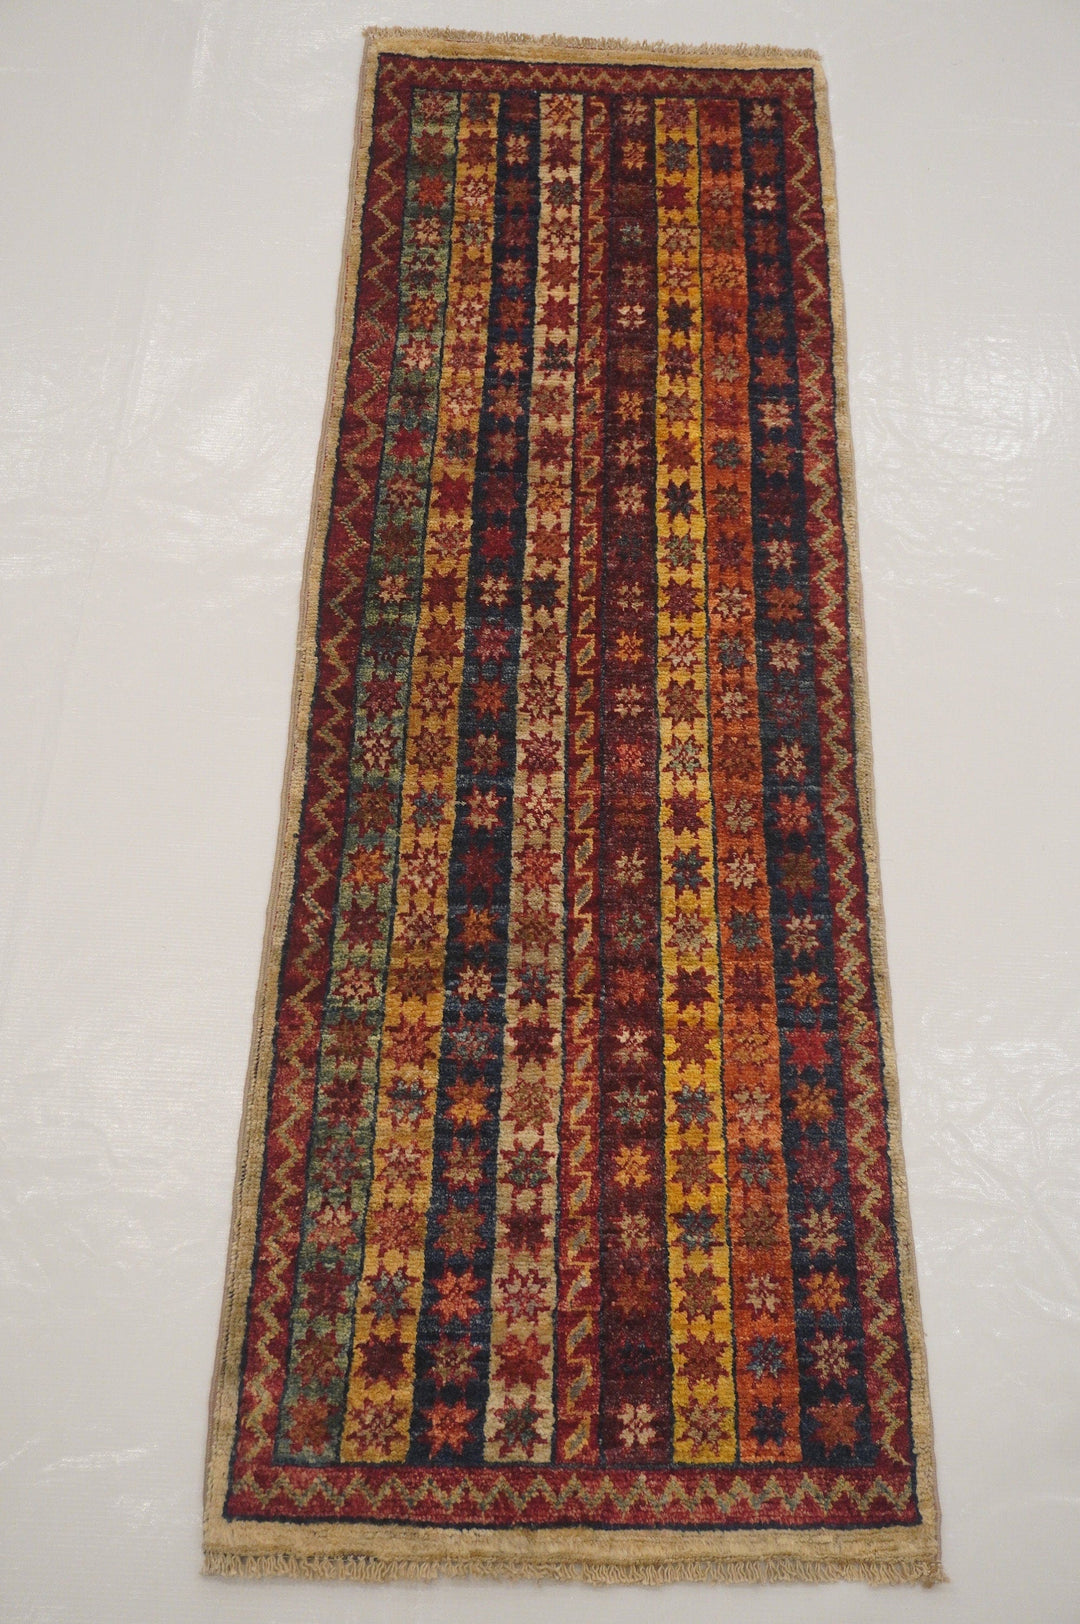 SOLD 2x5 Turkish Vintage Shawl Striped Multicolor Hand knotted runner rug - Yildiz Rugs